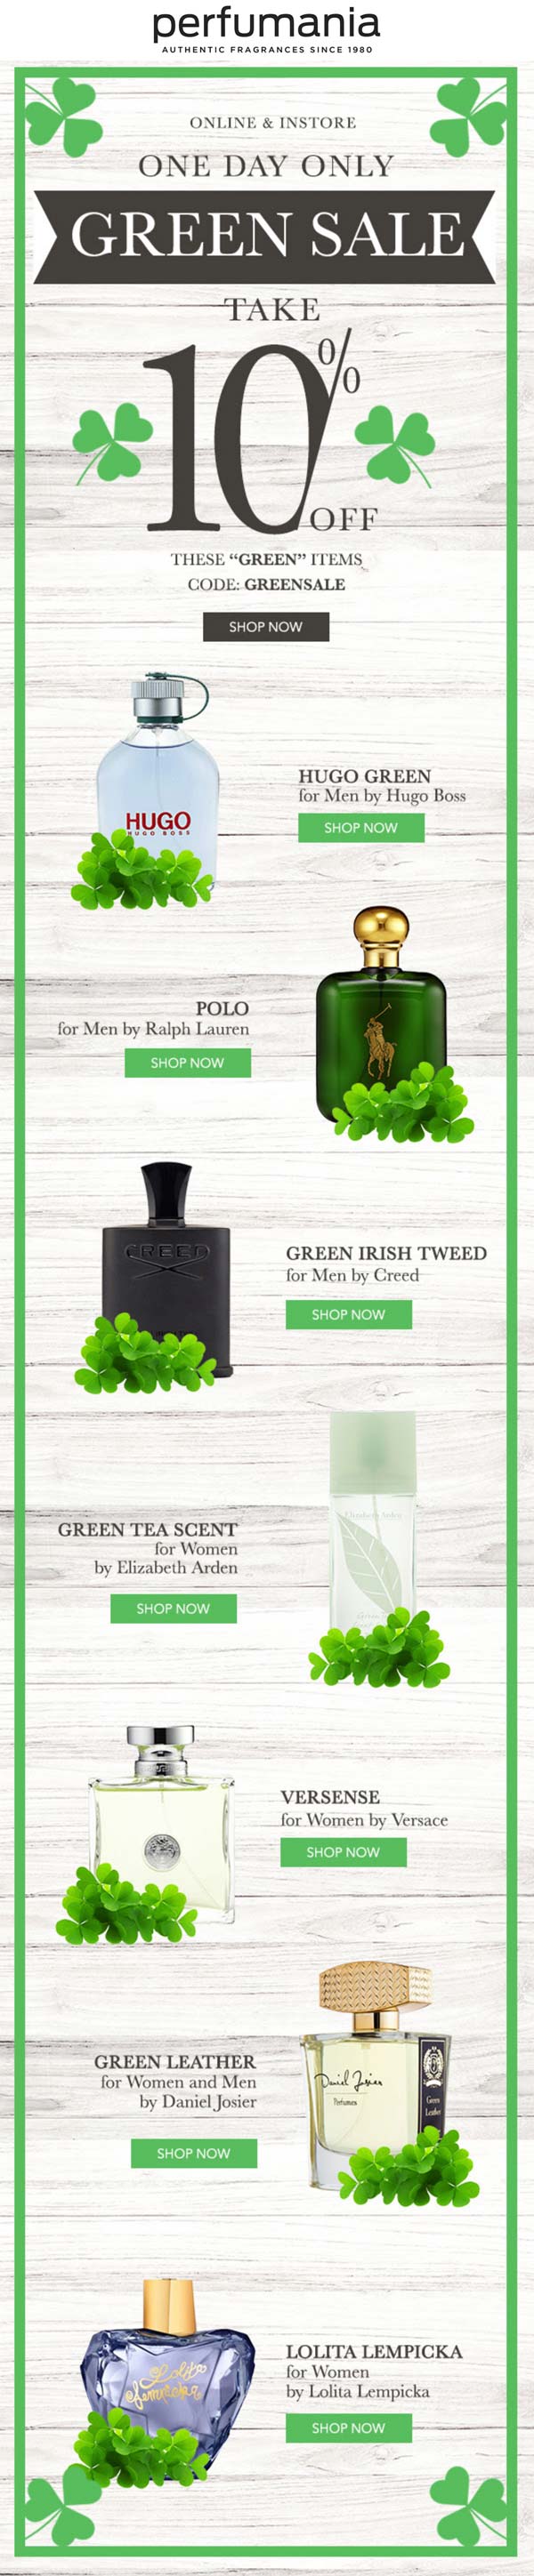 Perfumania stores Coupon  10% off green items today at Perfumania via promo code GREENSALE #perfumania 